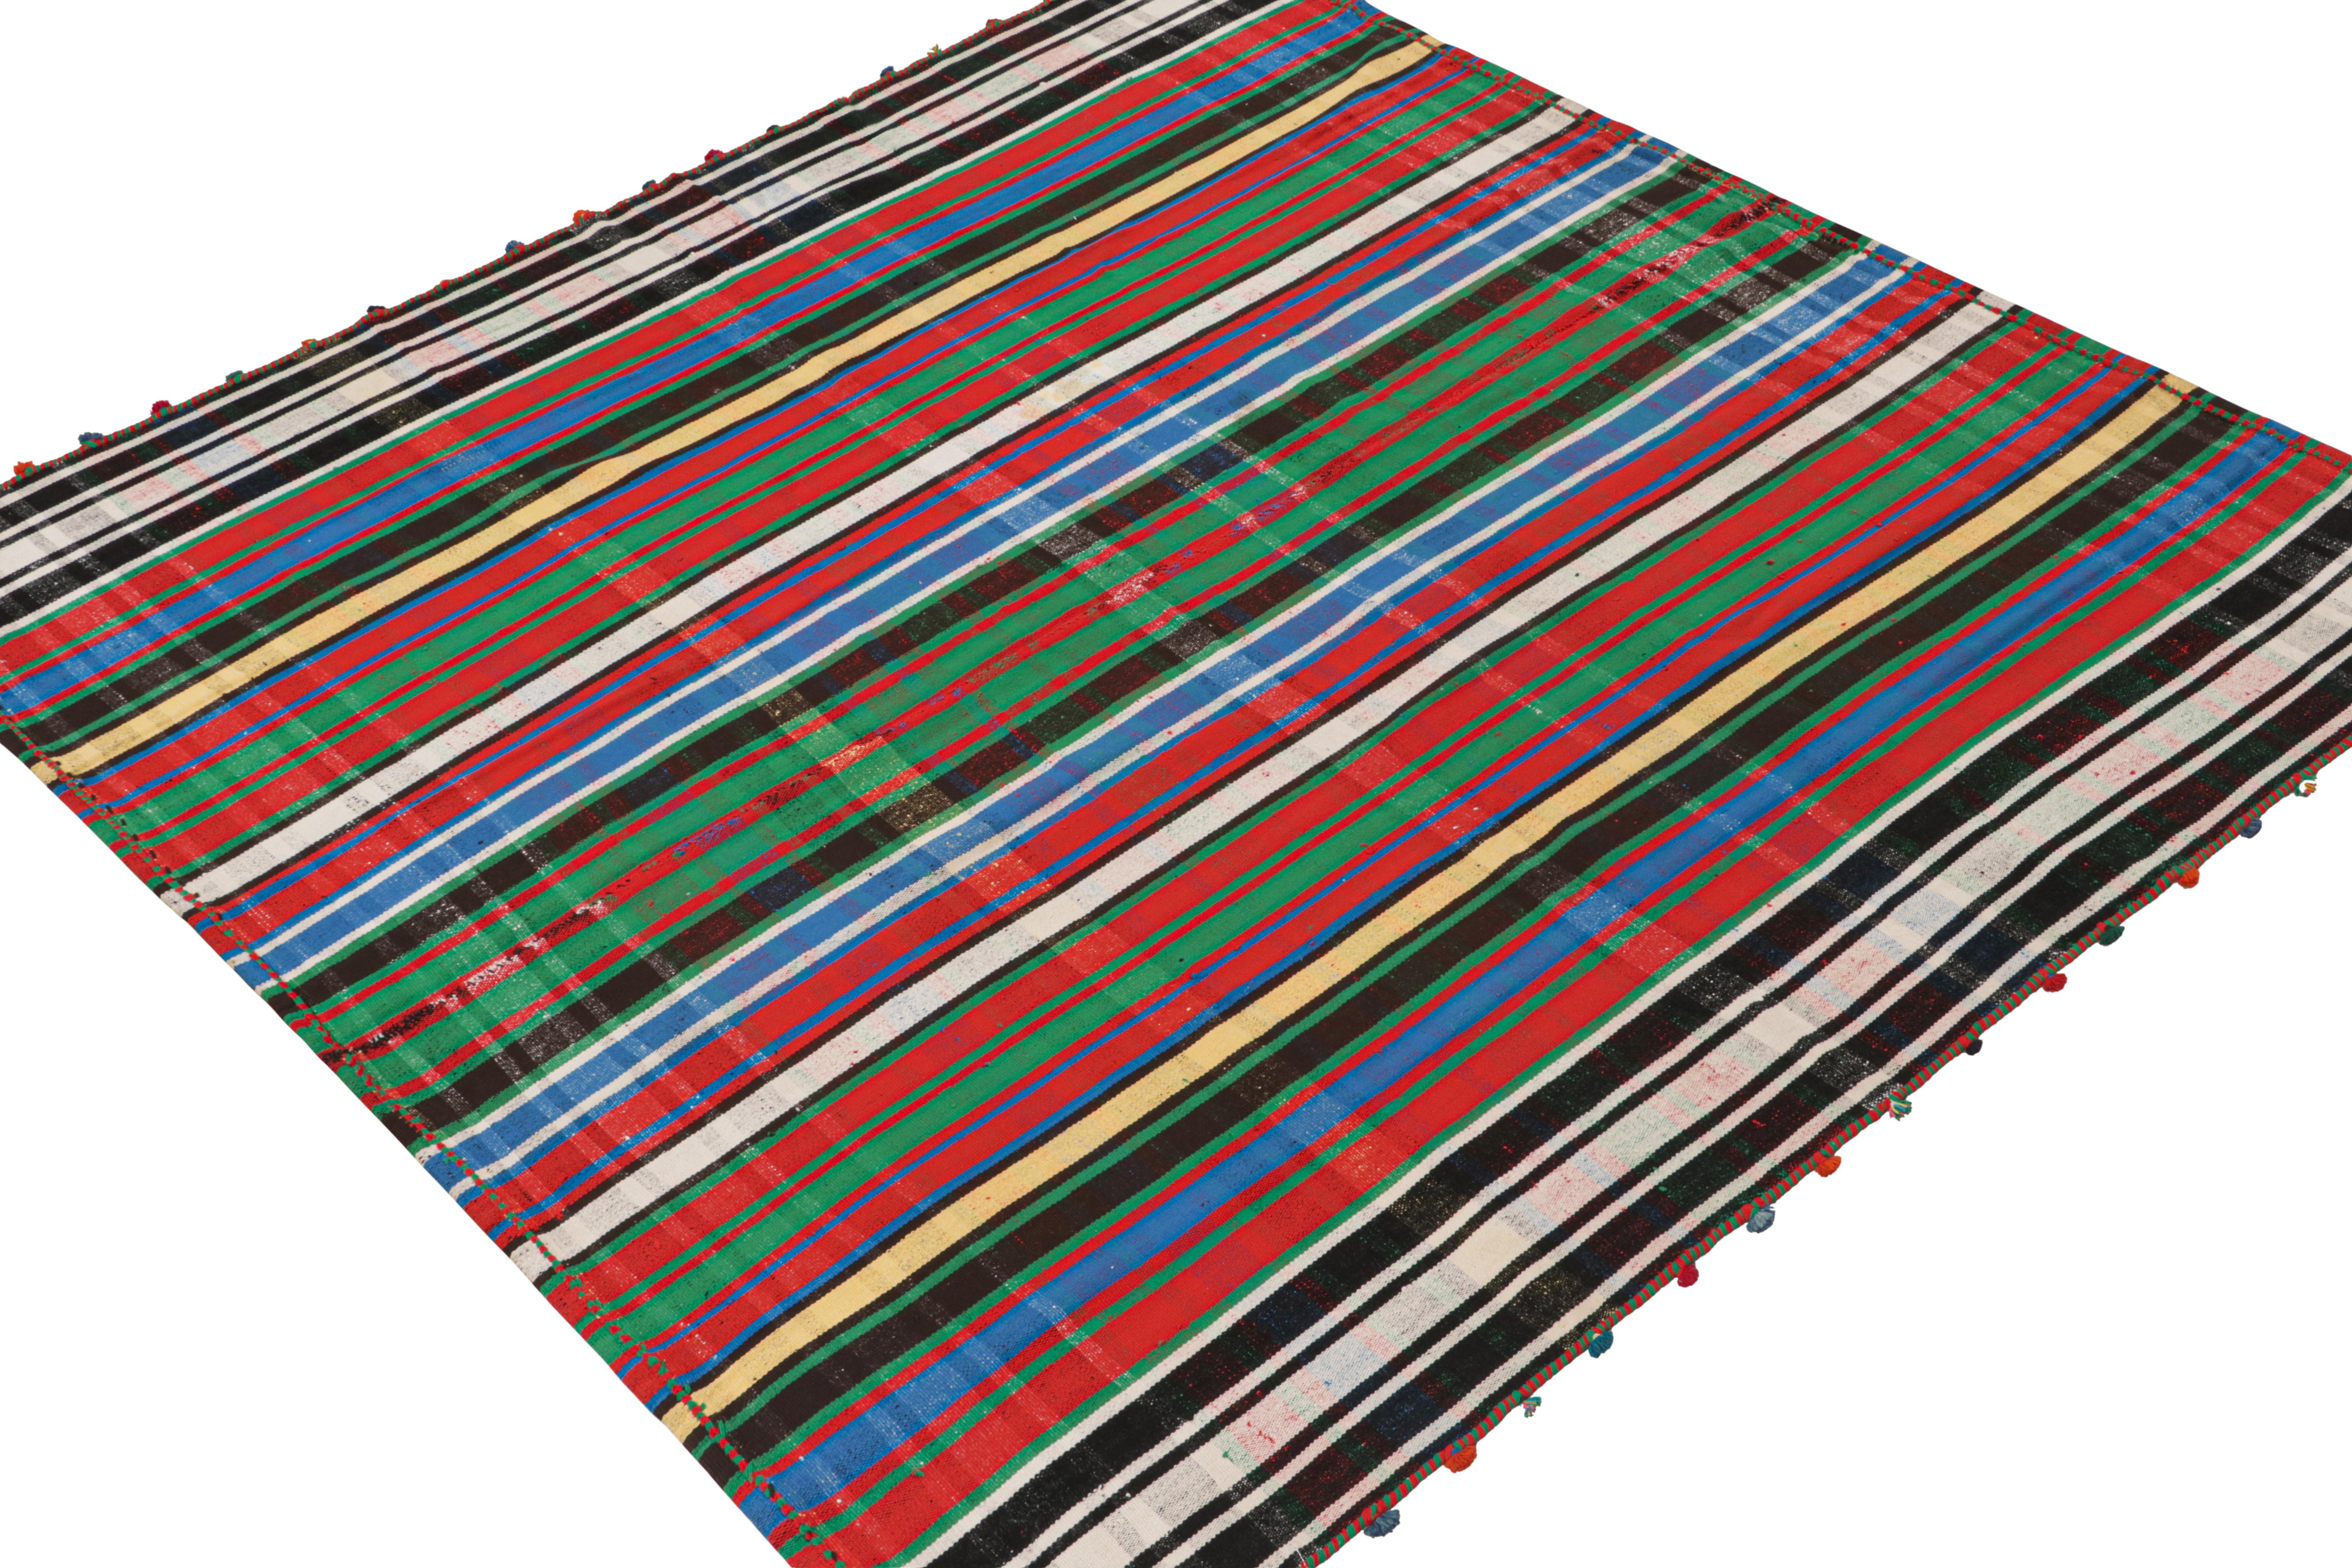 A vintage 5x6 Persian kilim rug, handwoven in wool circa 1950-1960.

Further on the Design:

Connoisseurs may appreciate this design’s panel-weaving technique, in which tribal weavers combine multiple pieces into larger Kilims. This method